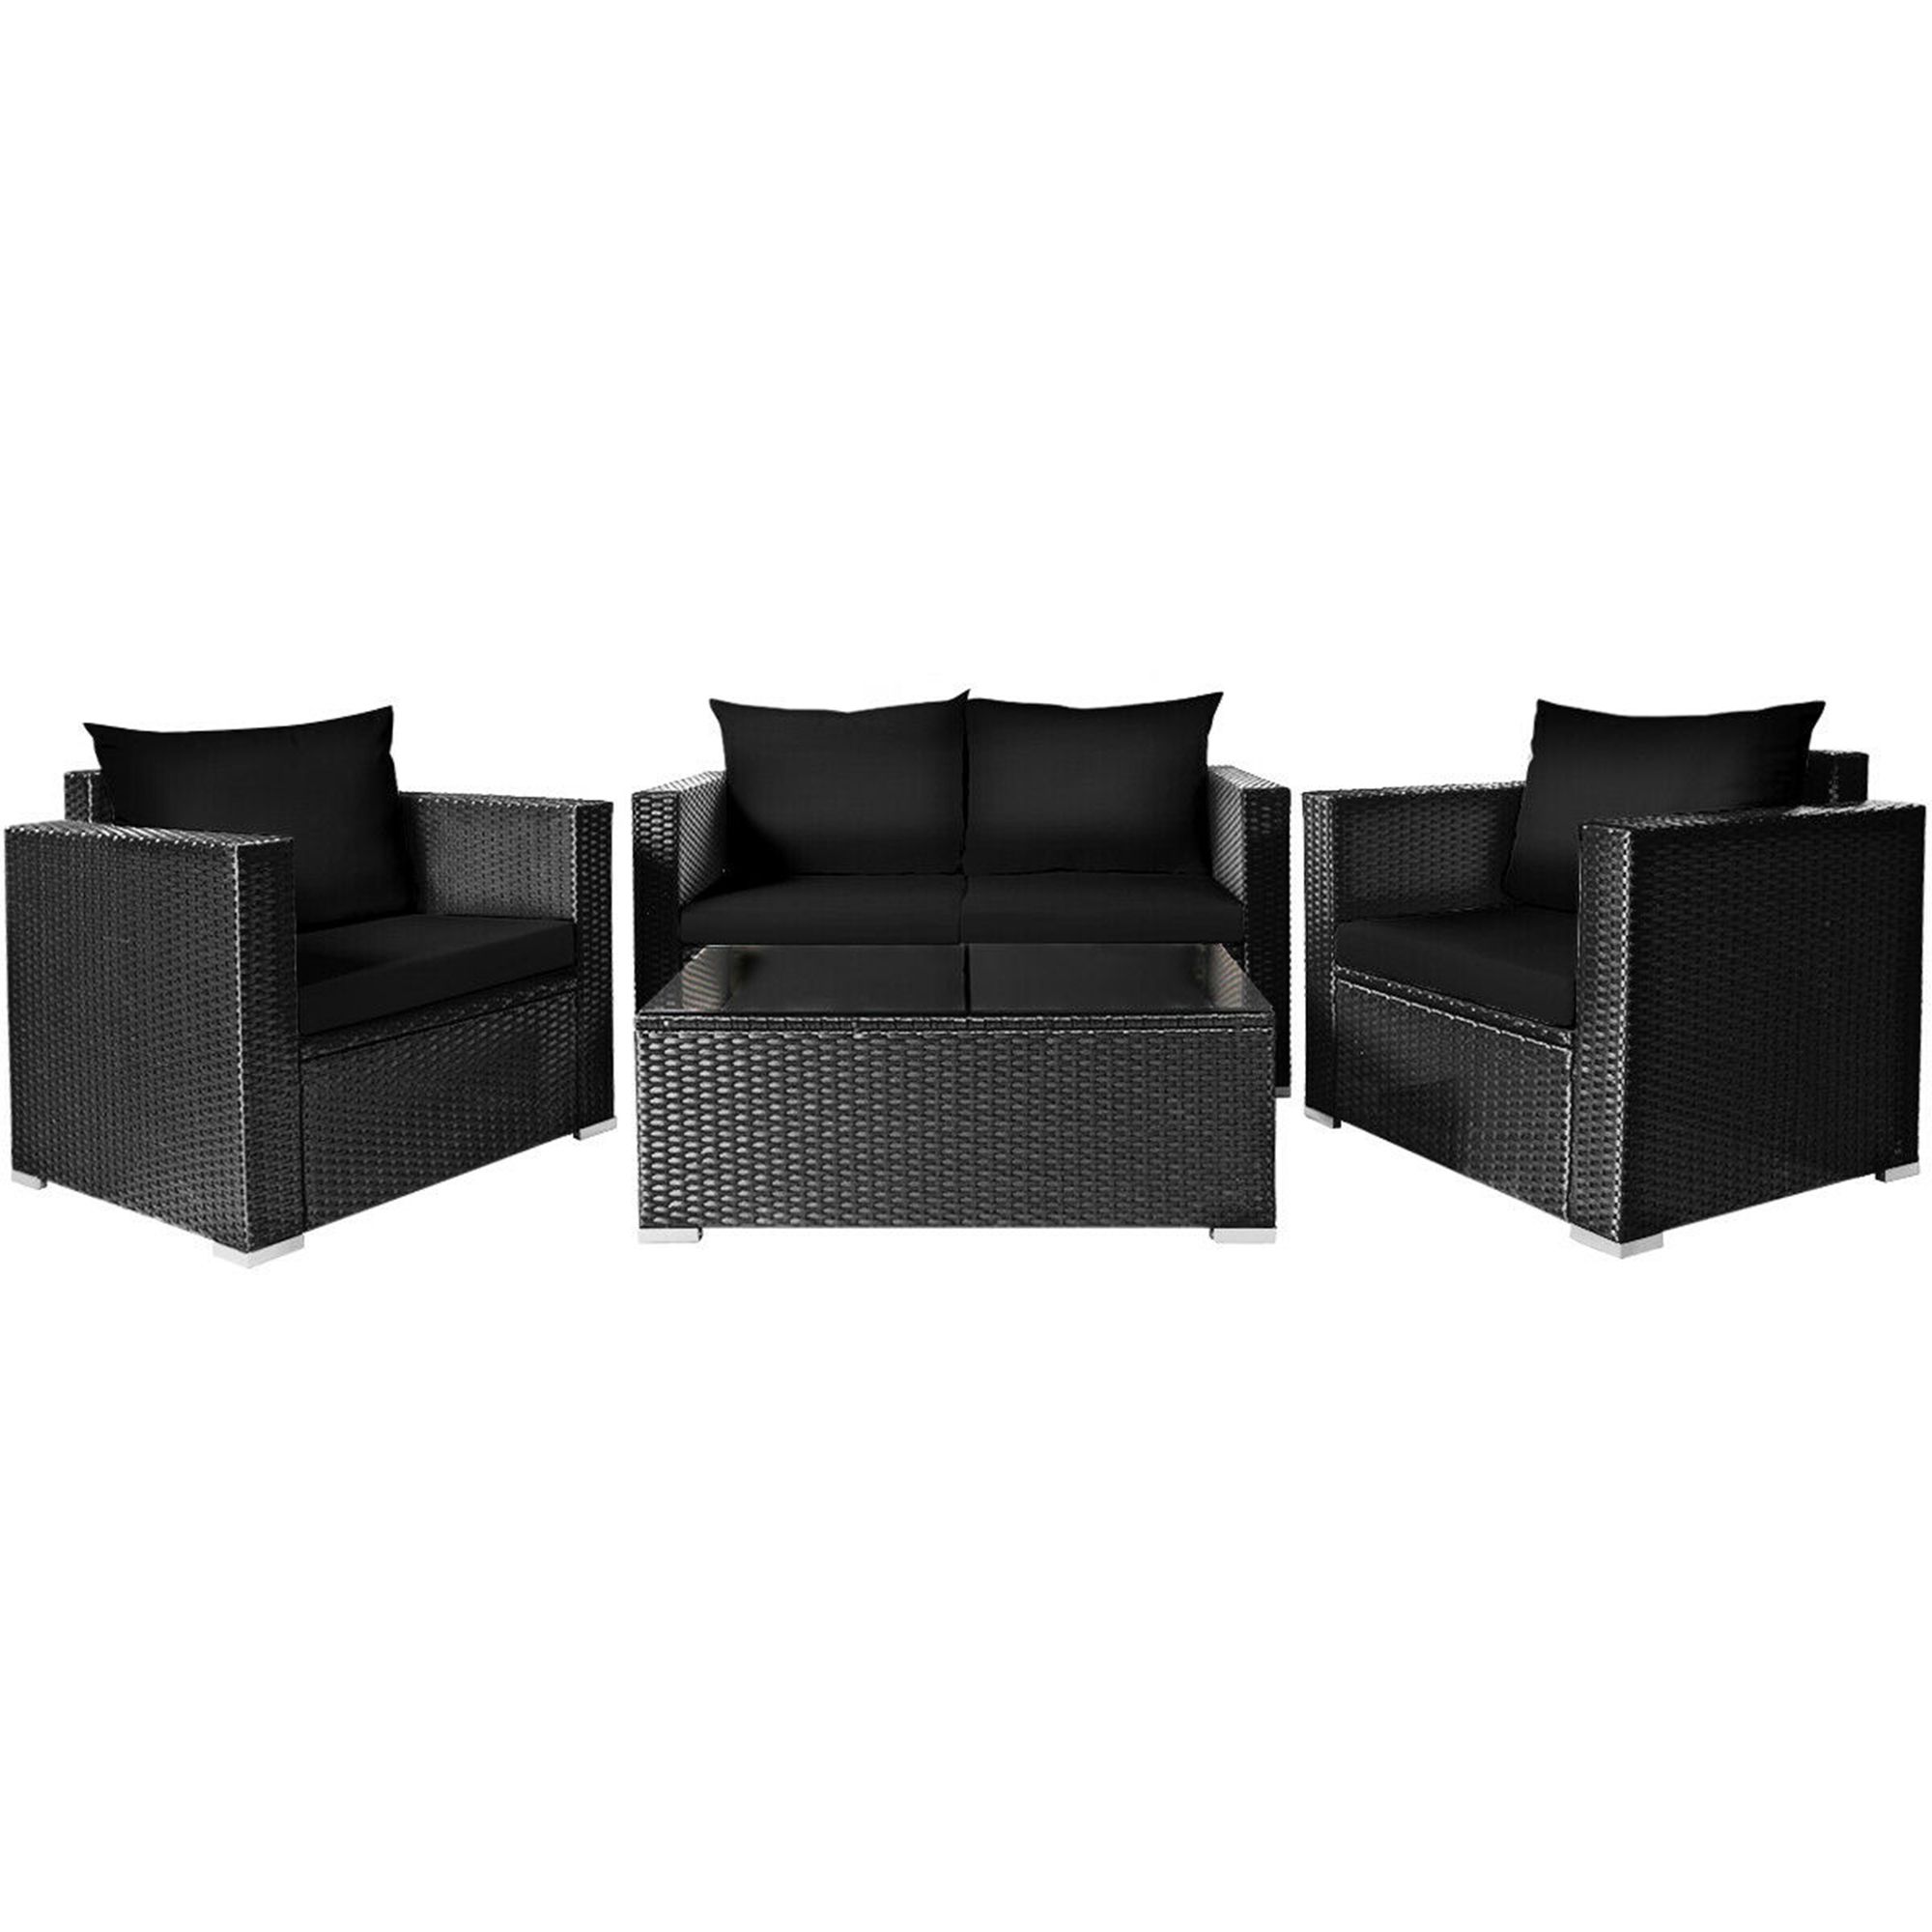 Well Liked Black Cushion Patio Conversation Sets In Gymax 4pcs Rattan Patio Conversation Set Outdoor Furniture Set W/ Black (View 7 of 15)